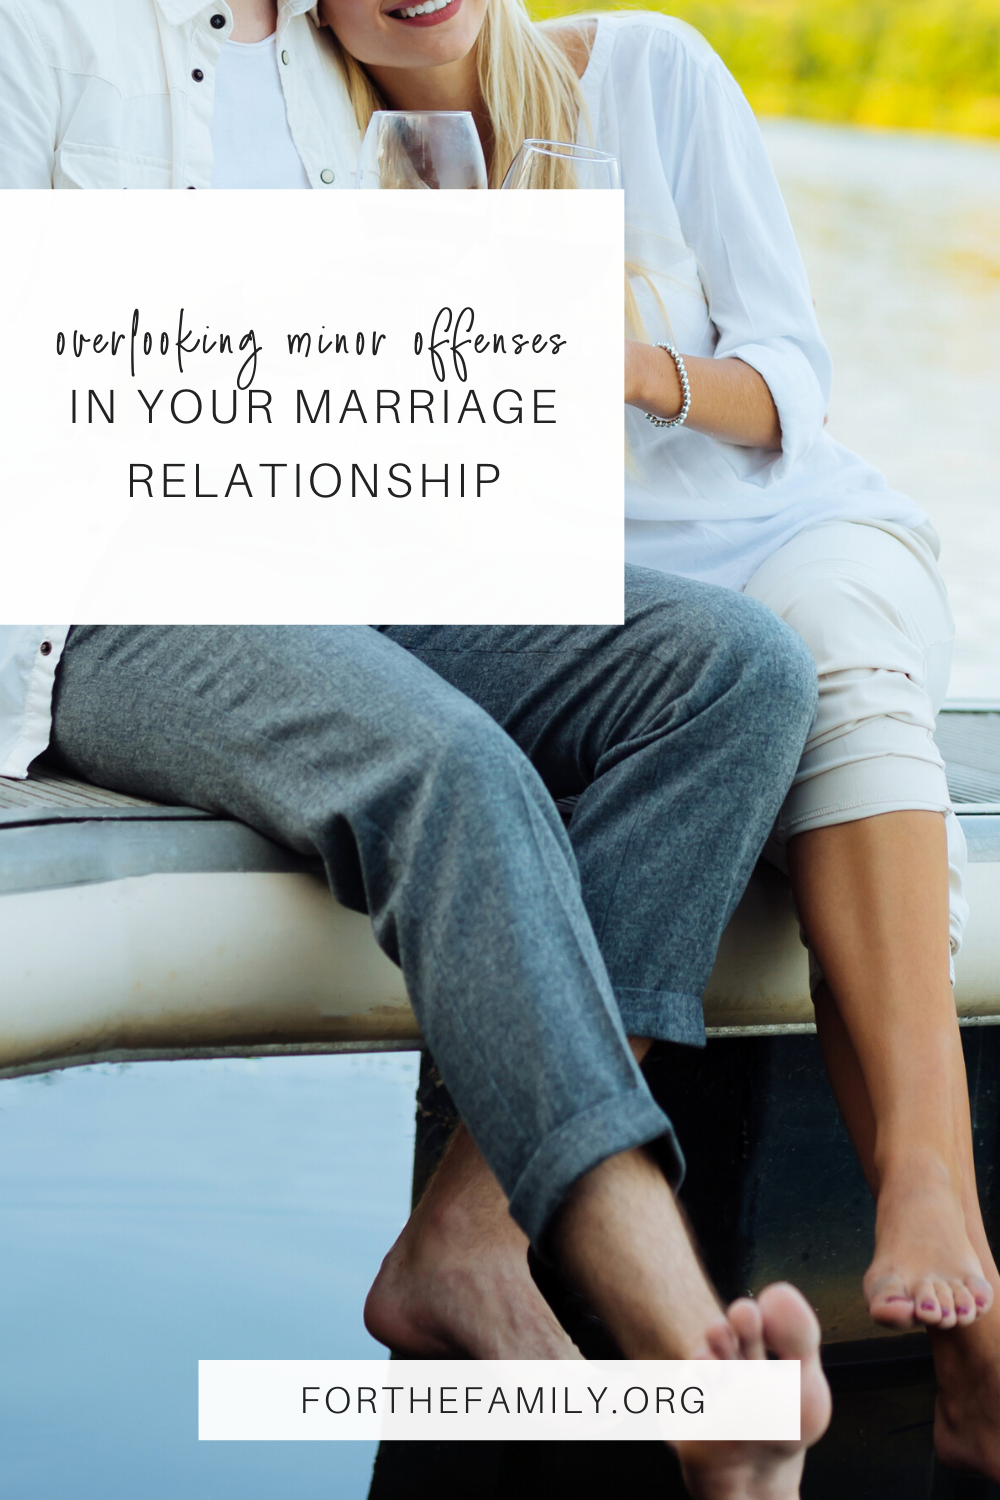 Overlooking Minor Offenses in Your Marriage Relationship